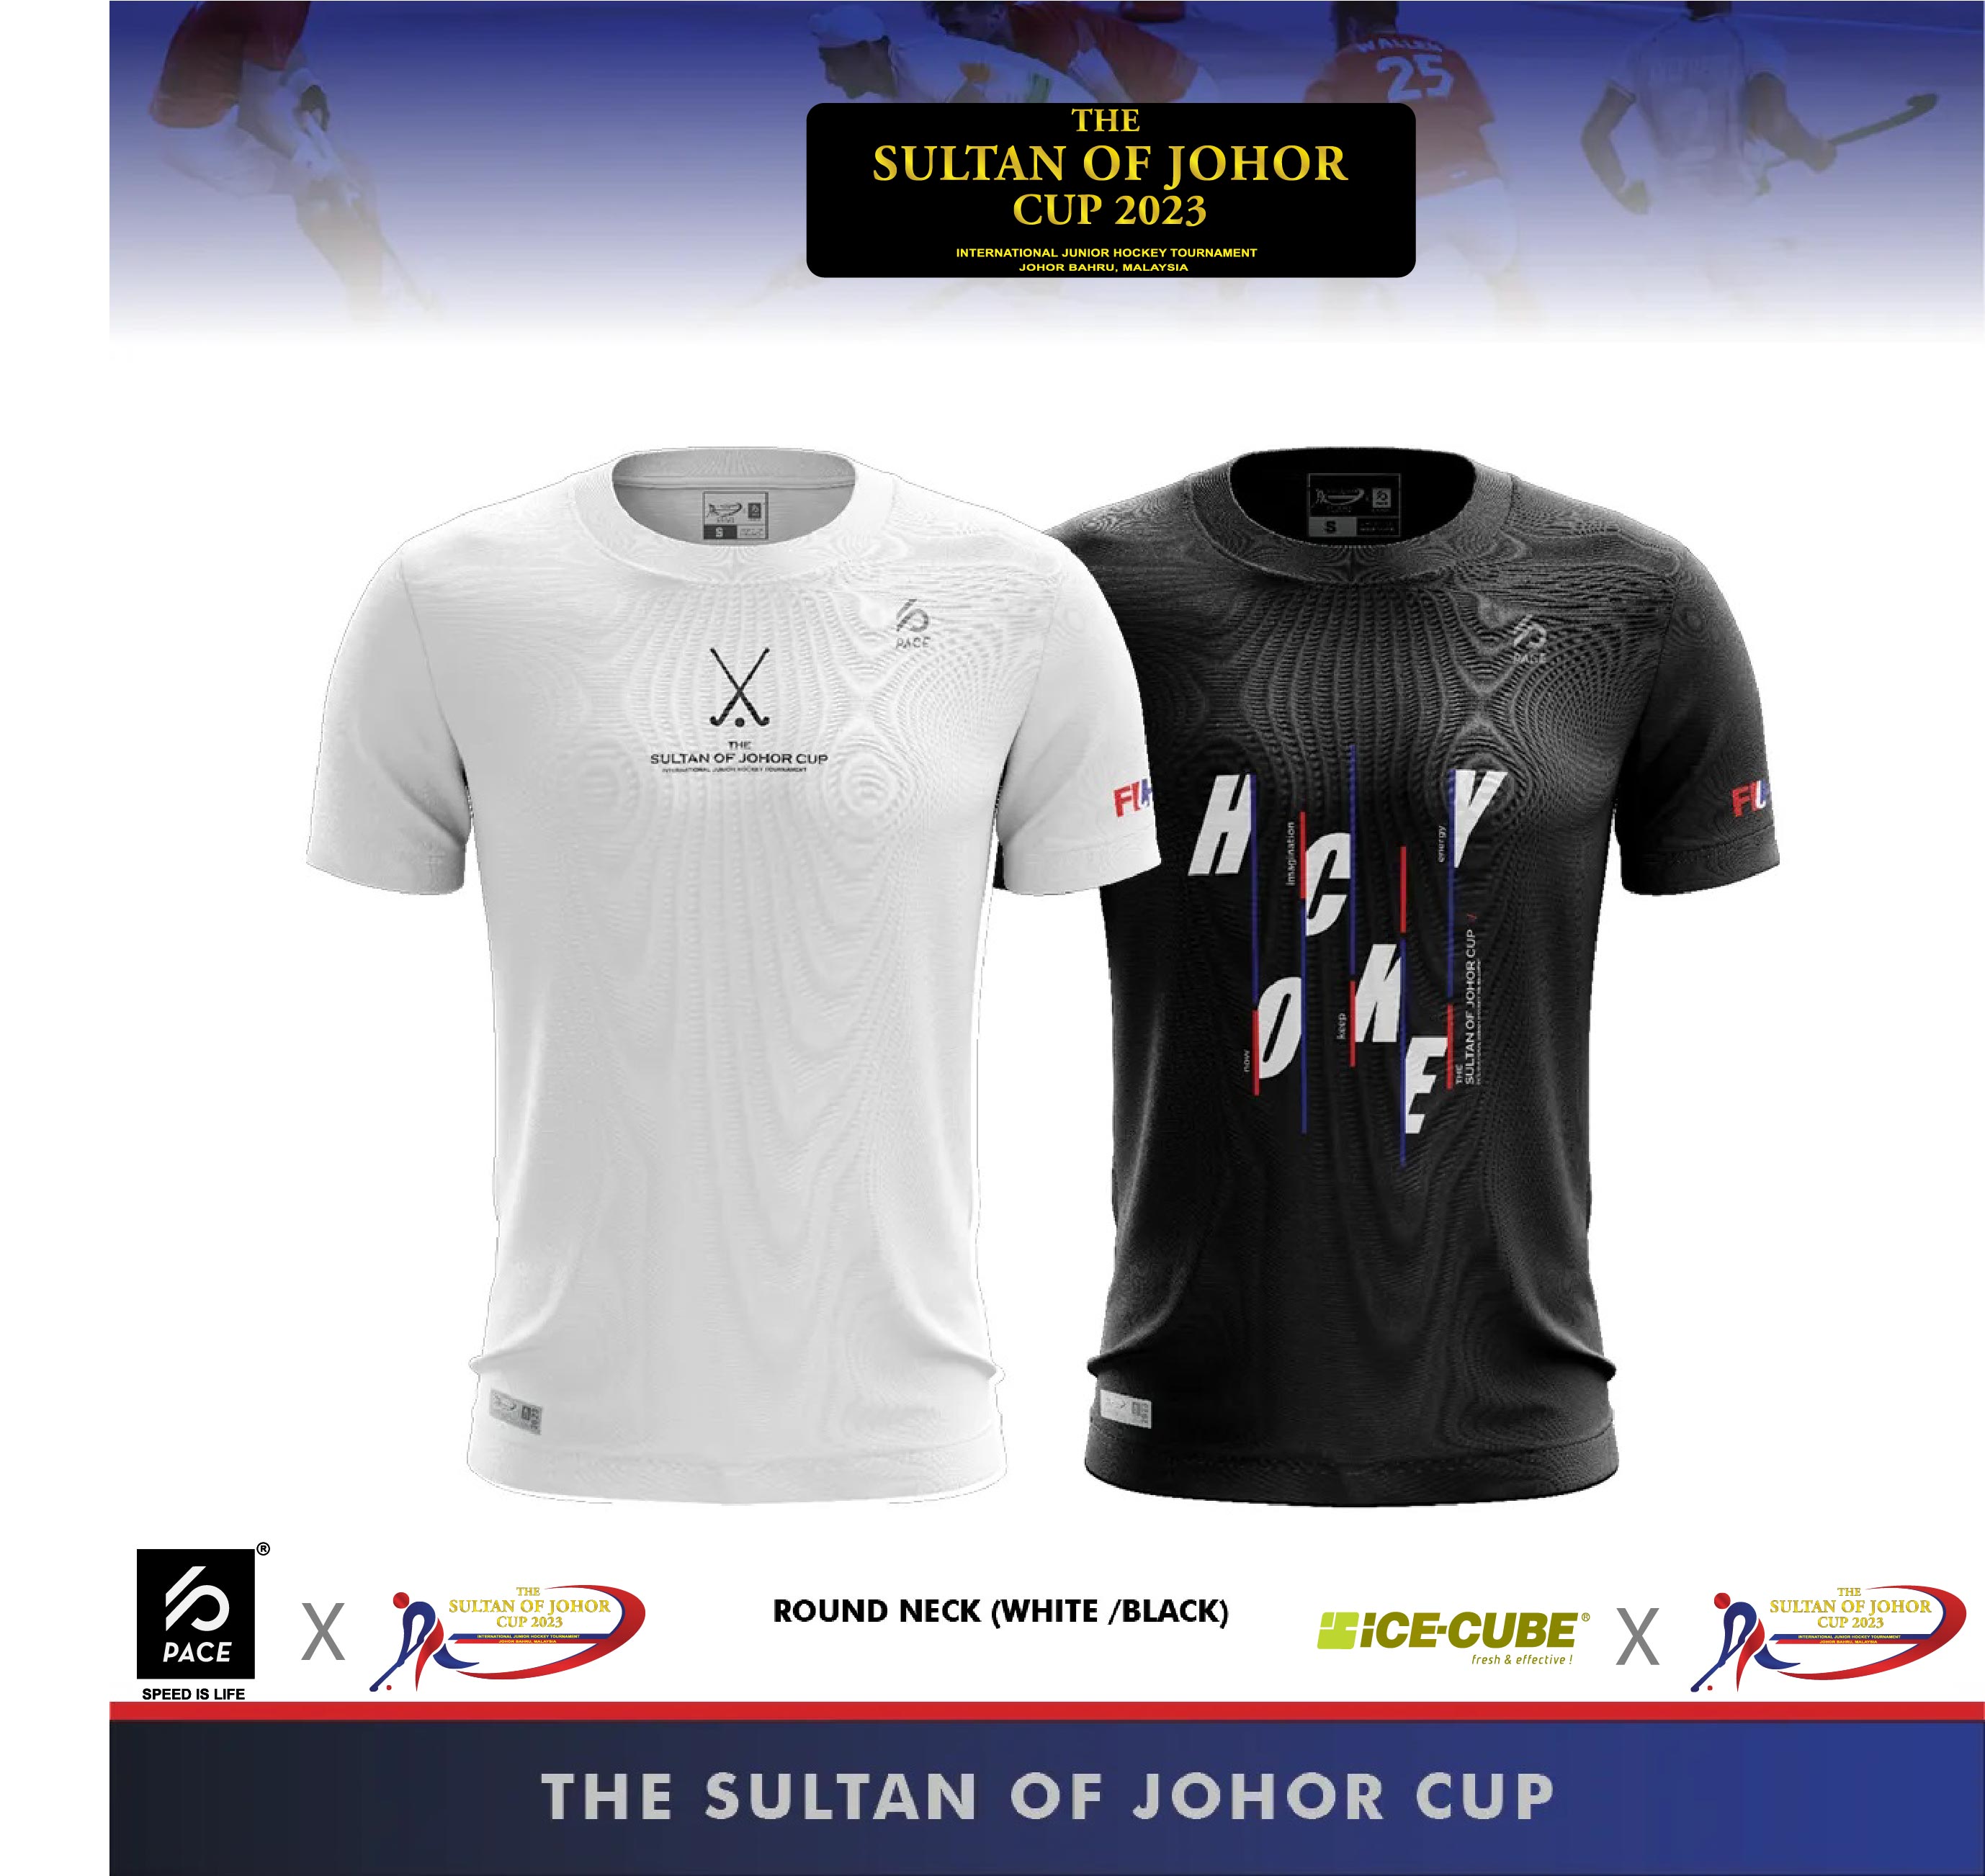 THE SULTAN OF JOHOR CUP -   ROUND NECK (WHITE /BLACK)